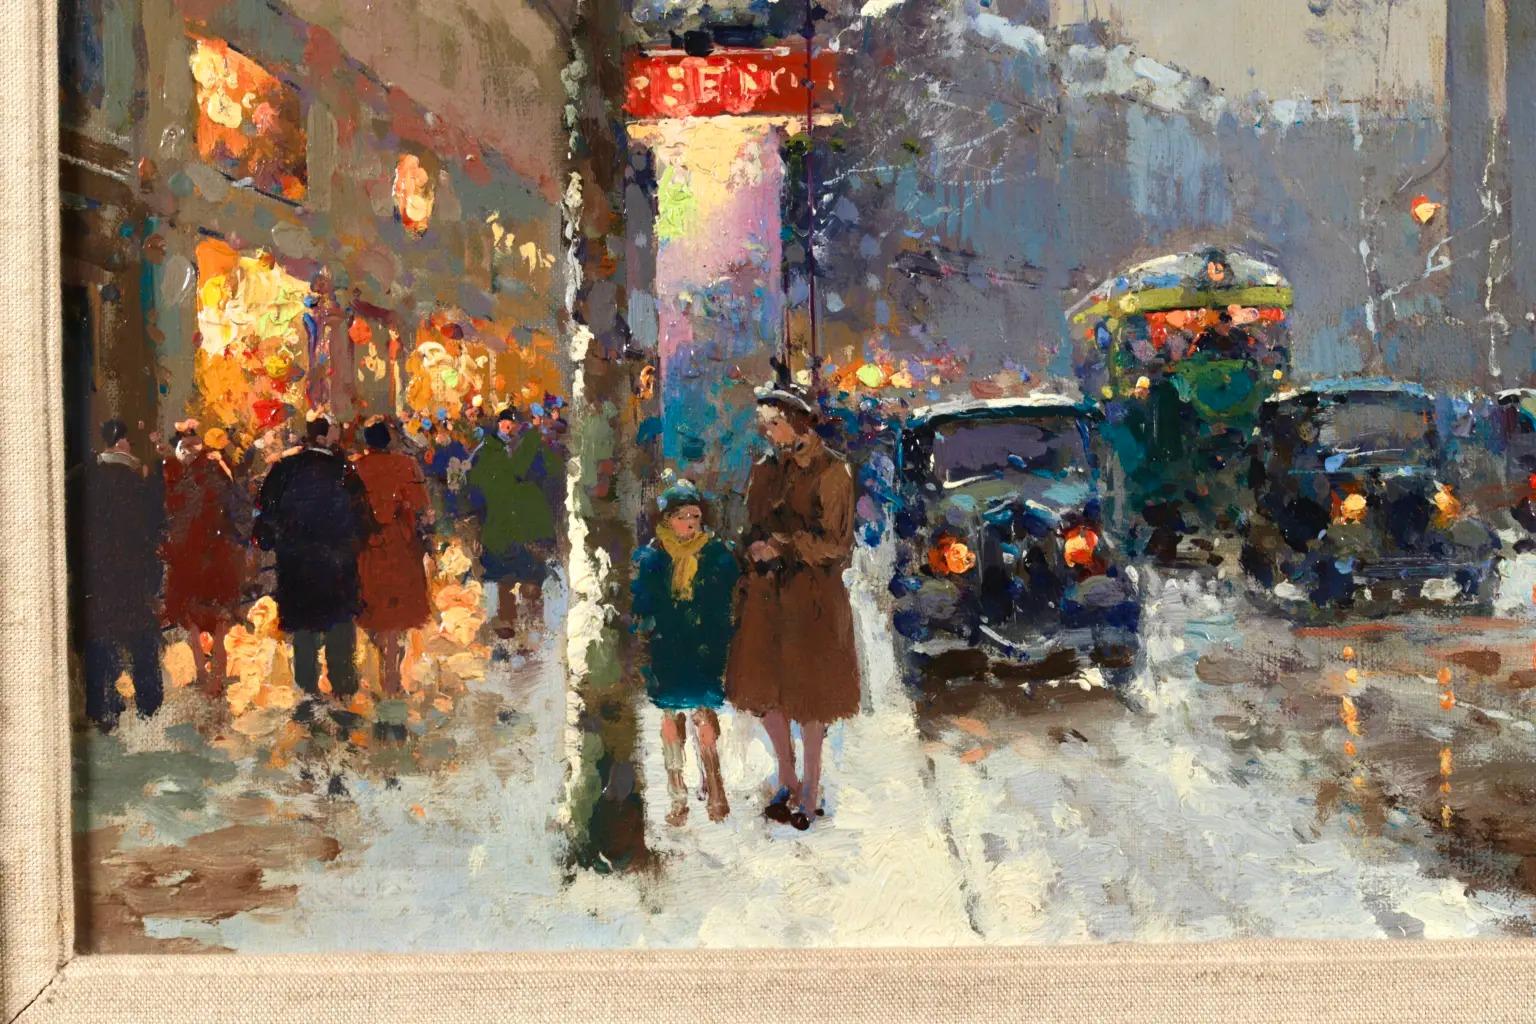 Signed figures in landscape circa 1950 by French impressionist painter Eduoard Cortes. The work depicts a view of La Madaleine, a Catholic parish church situated on Place de la Madeleine square in Paris, France. The bustling street scene set on a